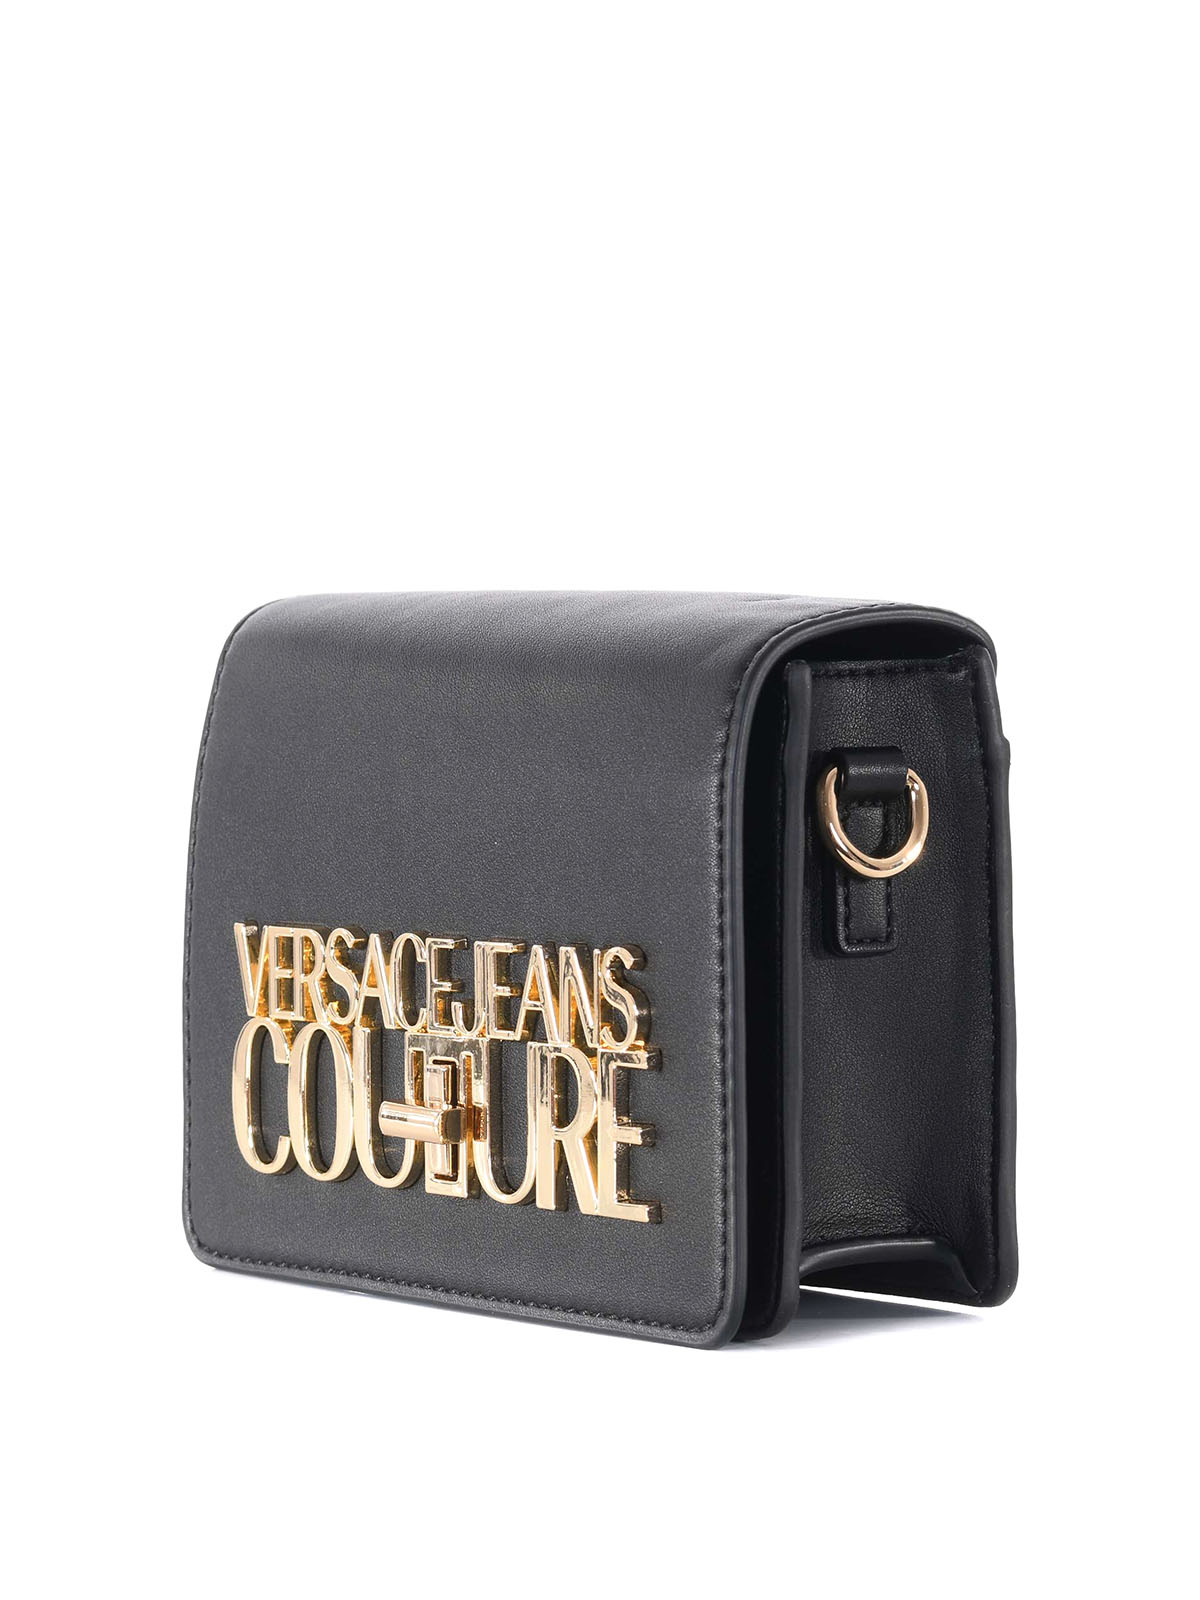 VERSACE JEANS COUTURE ハンドバッグ クラッチバッグ 黒 - セカンド